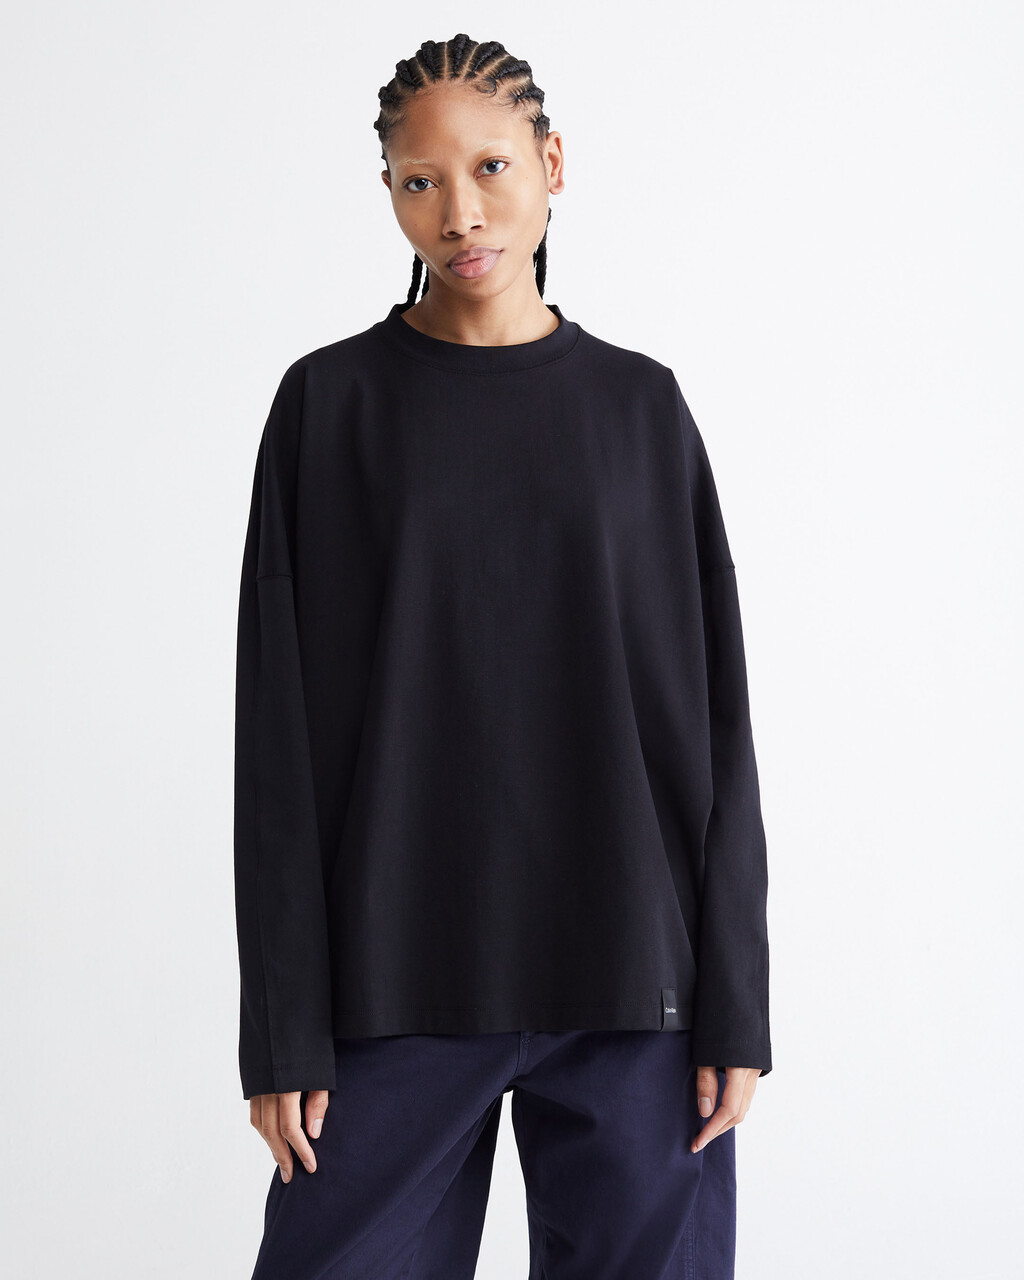 STANDARDS COMPACT COTTON LONG SLEEVE TEE, BLACK BEAUTY-00, hi-res